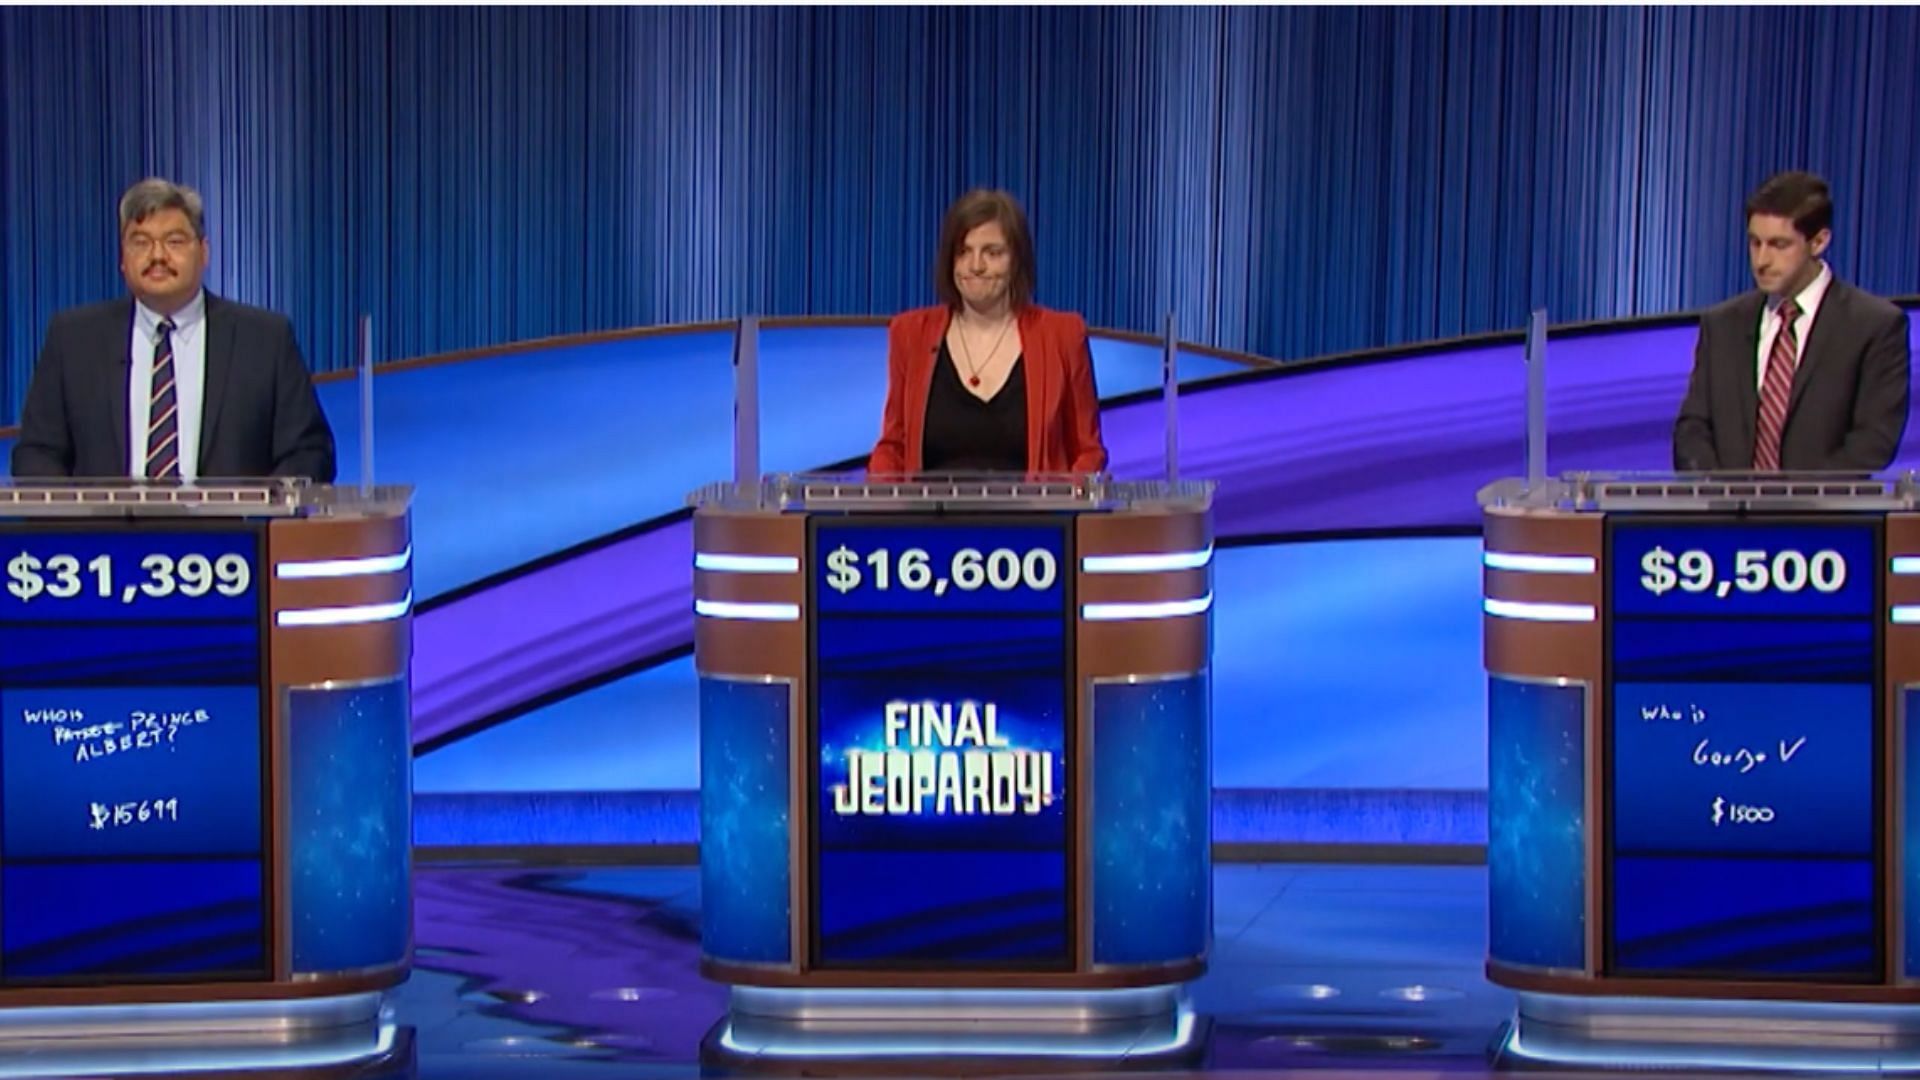 Two-day champion Luigi de Guzman returned on Jeopardy to play against two new players